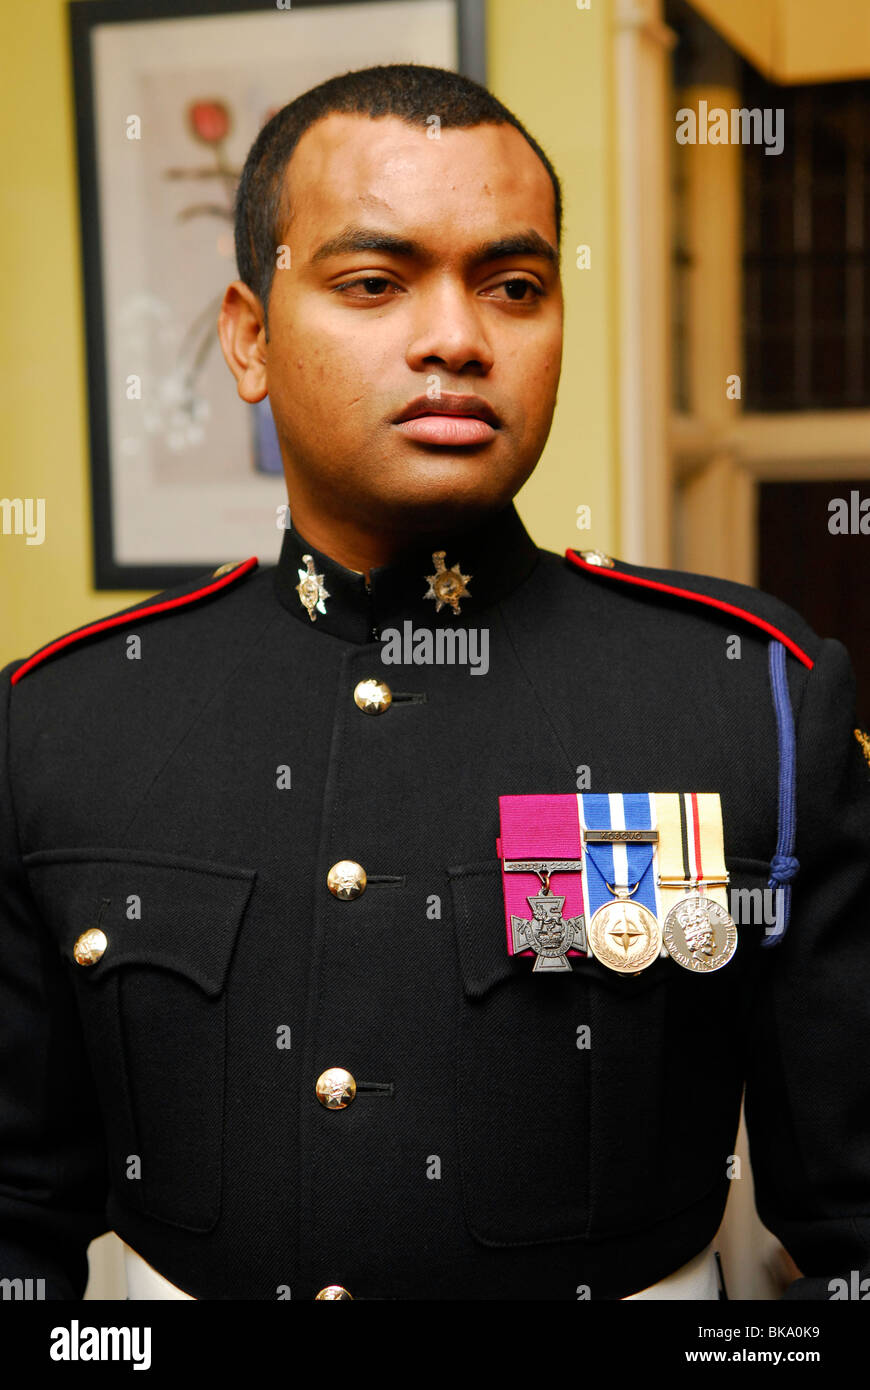 Lance Corporal Johnson Beharry wearing his medals. He is the first living recipient in 40 years to gain the VC (Victoria Cross). Stock Photo